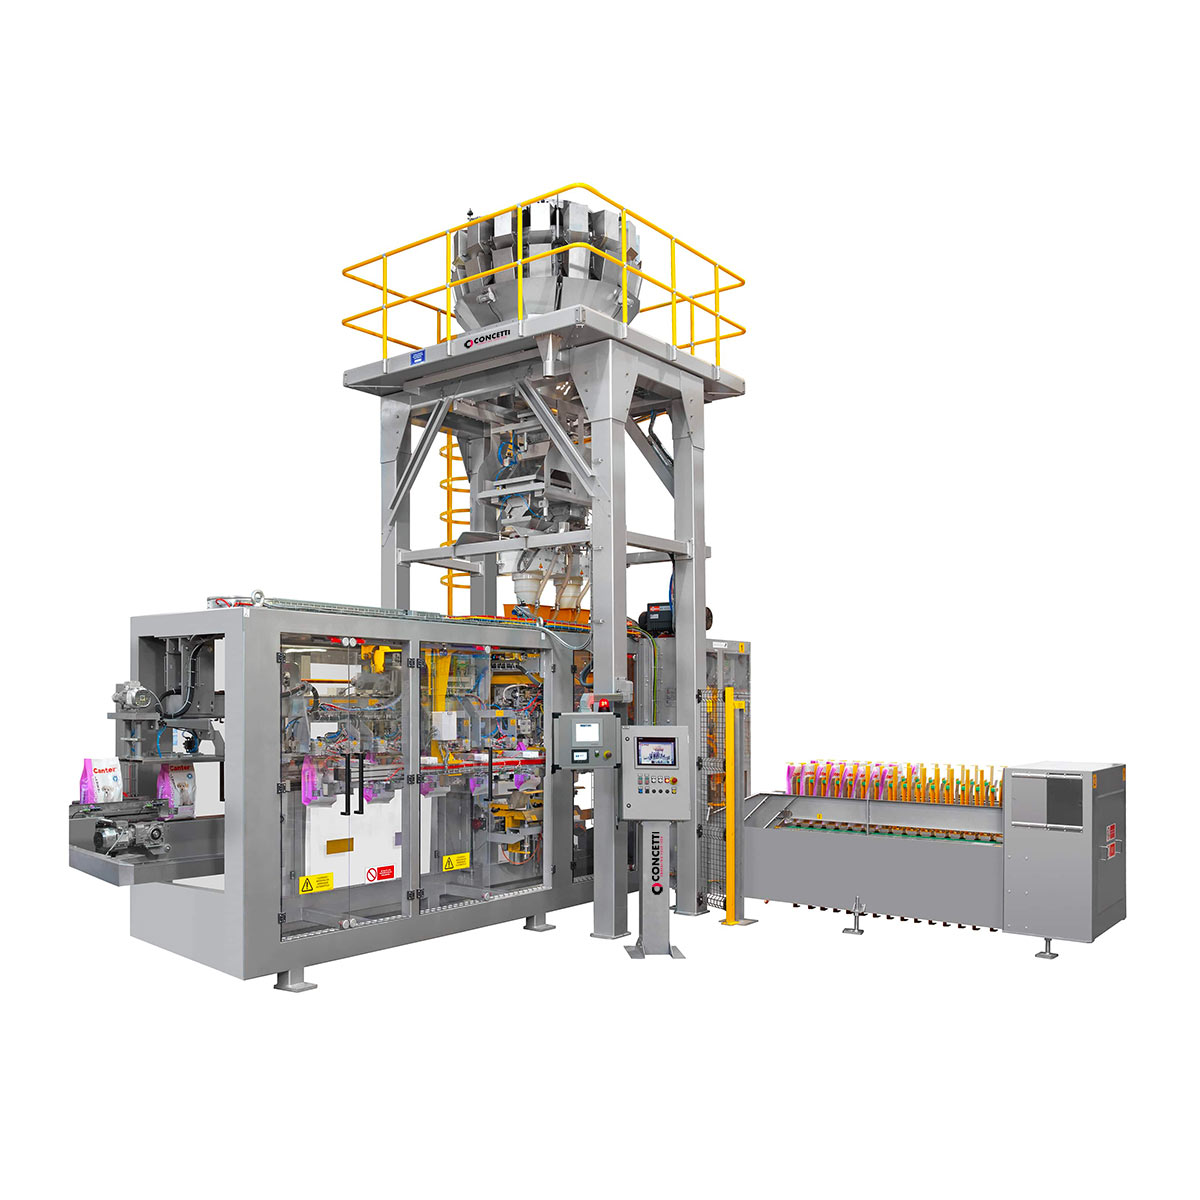 Big Bag Packaging Equipment Manufacturer,Supplier,Exporter from India